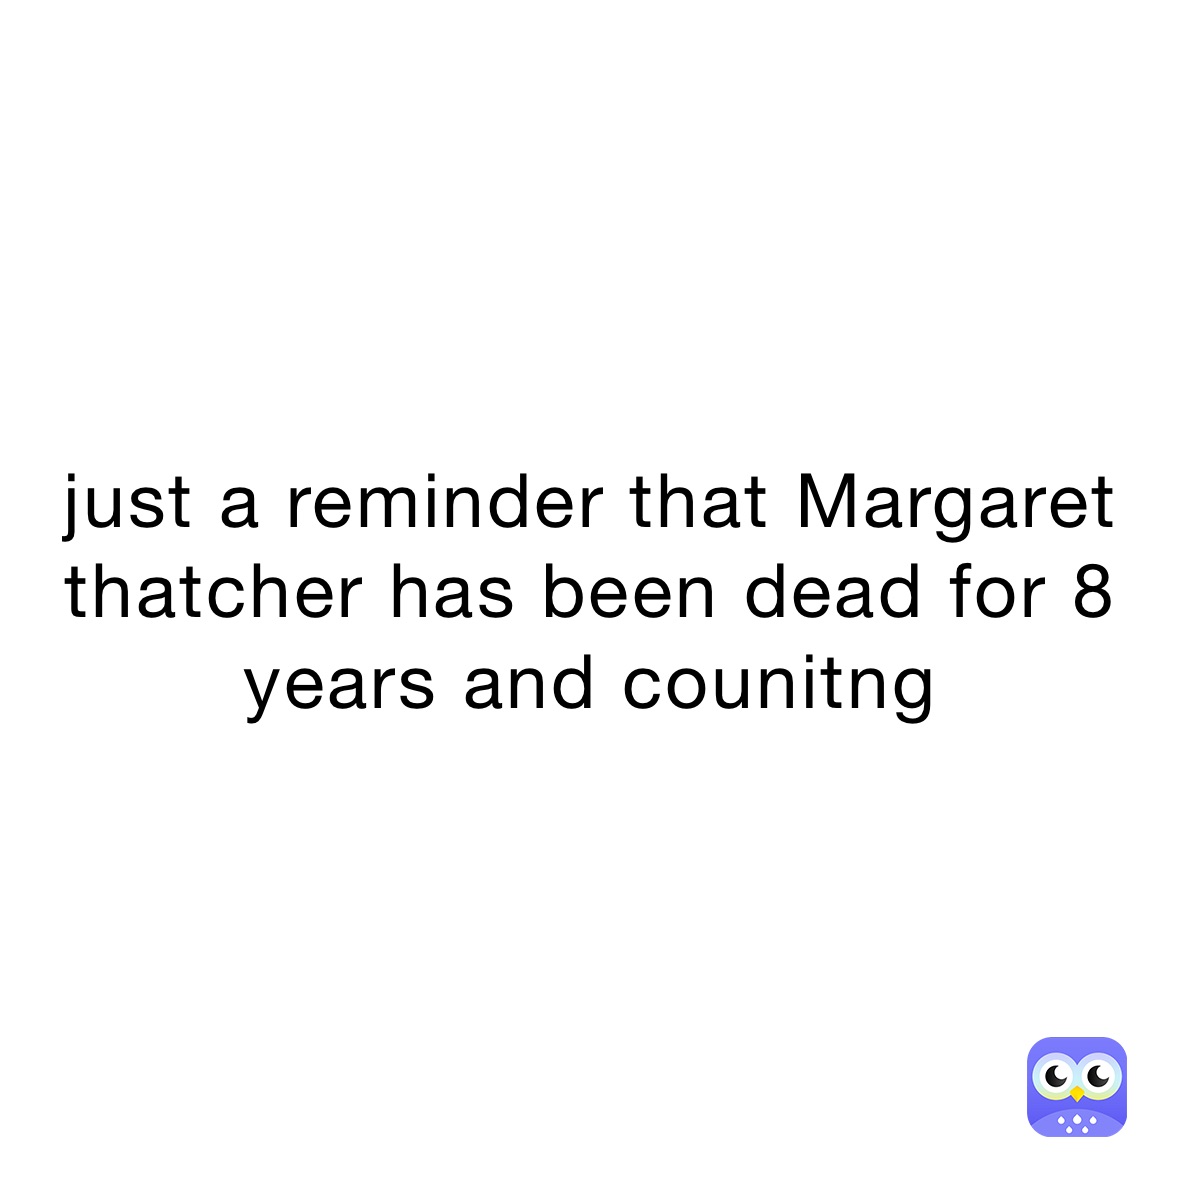 just a reminder that Margaret thatcher has been dead for 8 years and counitng